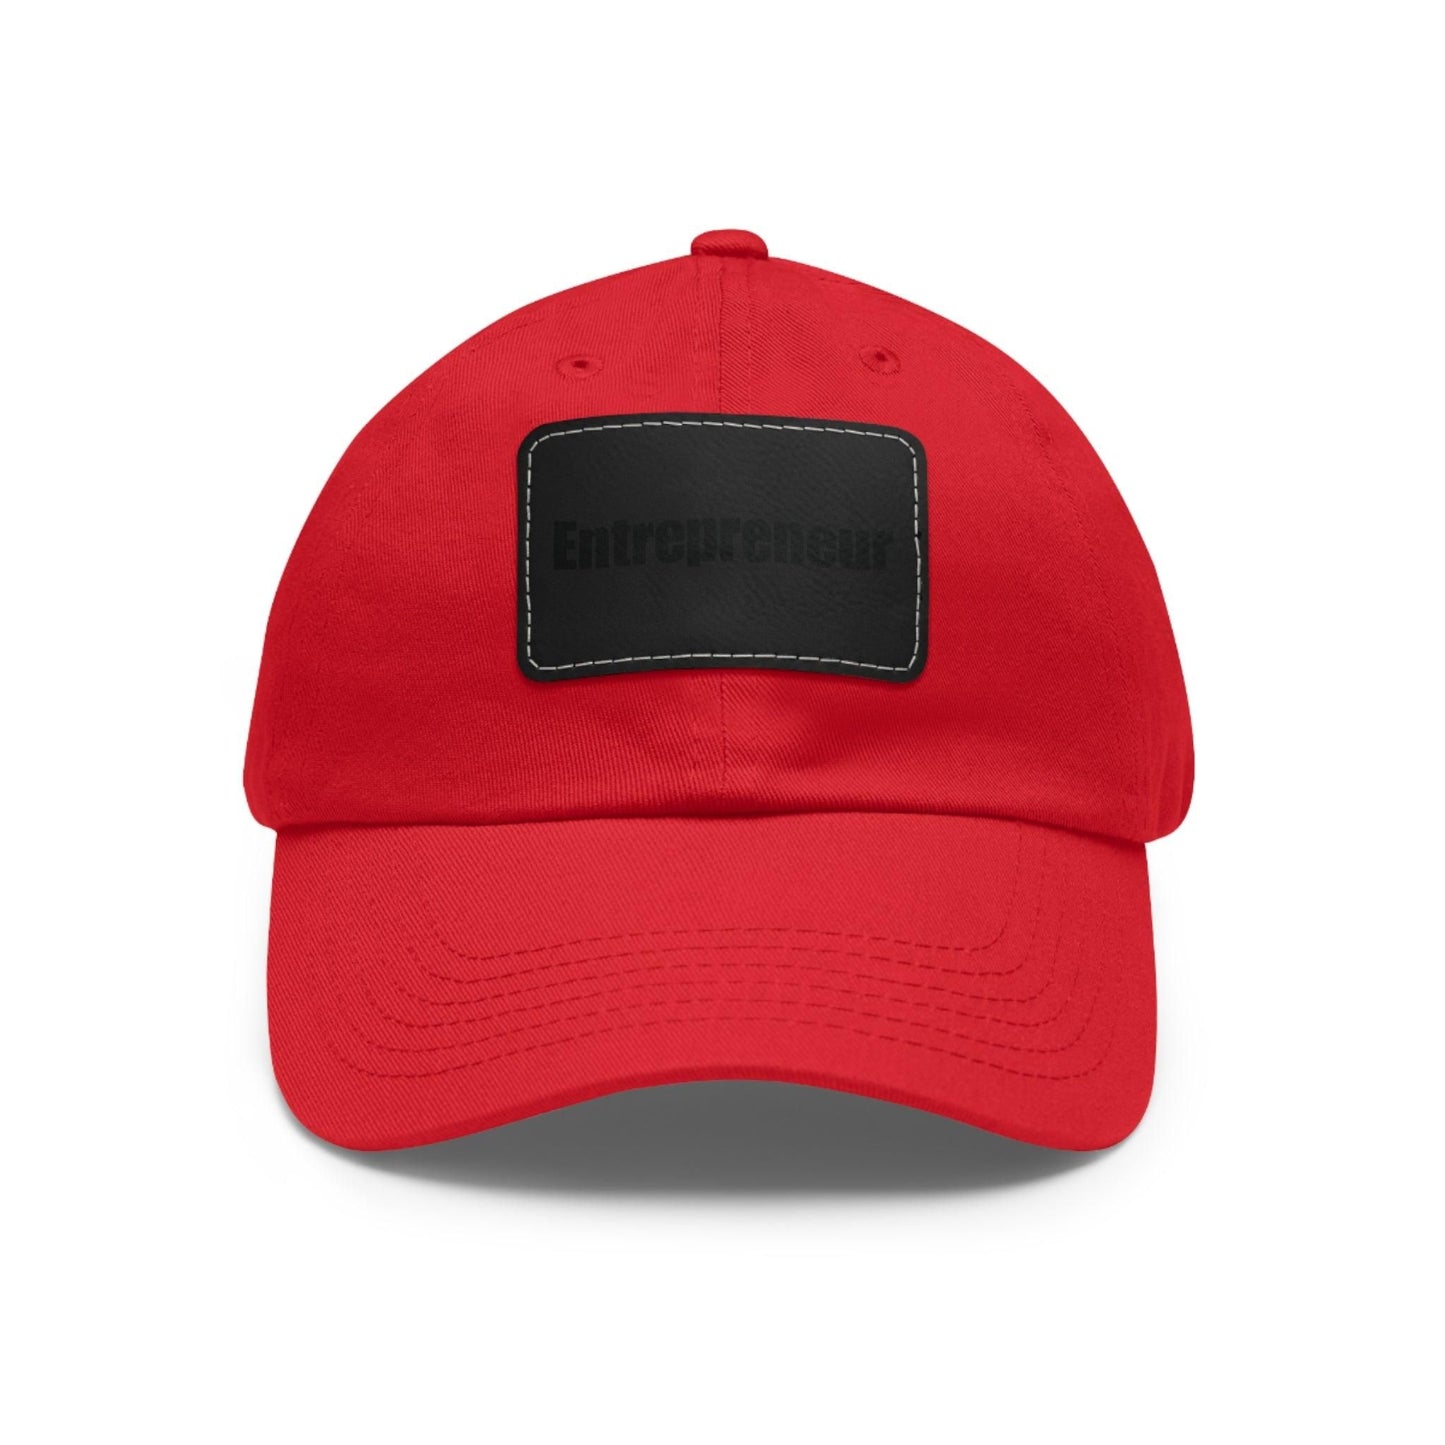 Entrepreneur Baseball Hat with Leather Patch Cap Red / Black patch Rectangle One size